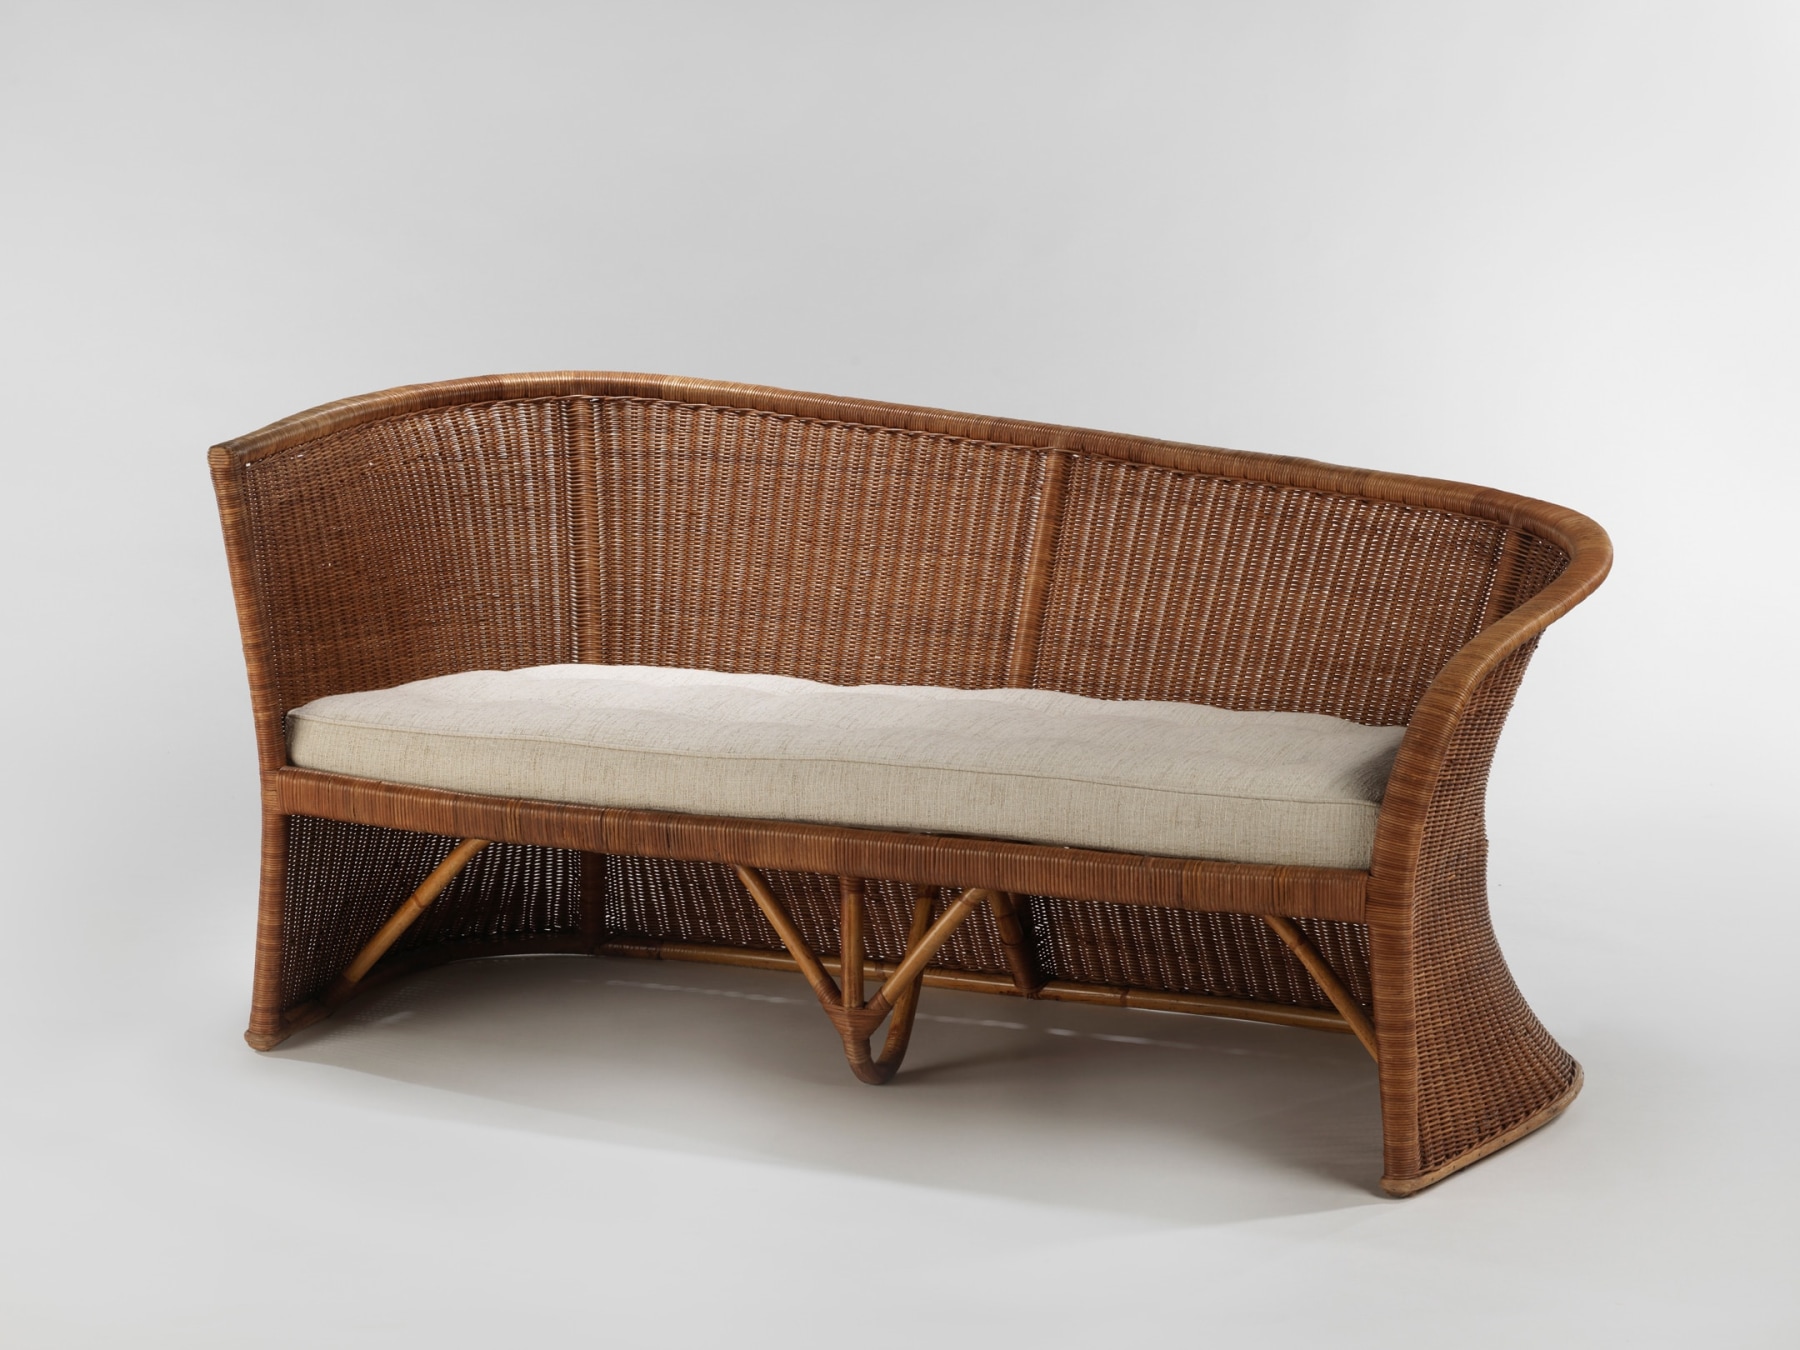 ANNOTATIONS | Rattan: Poetic Vocabulary of Shapes -  - Projects - Demisch Danant